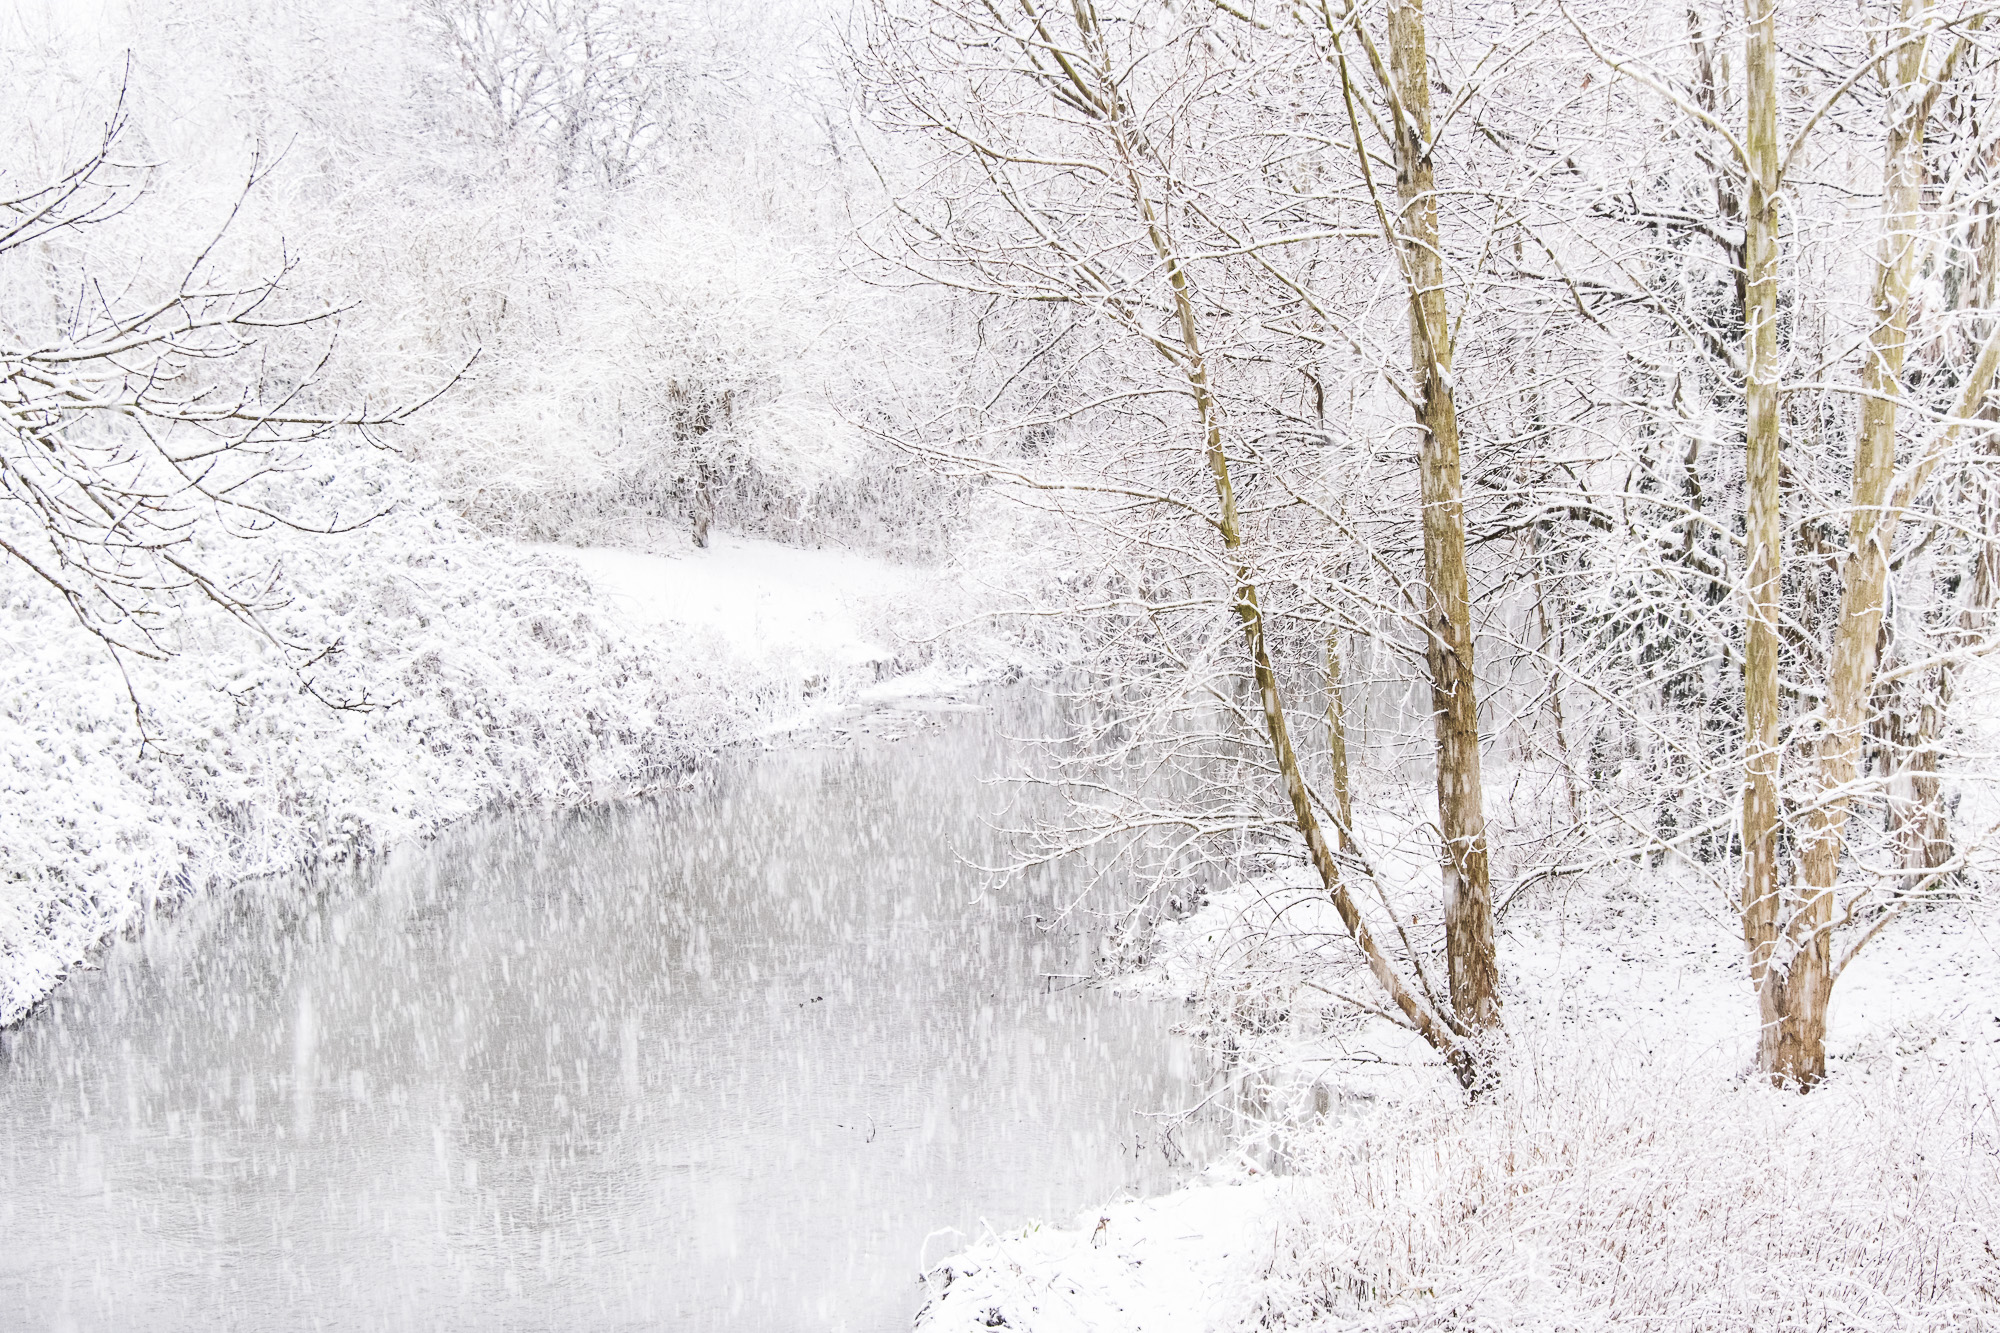 When the Snow Fell on River Crane